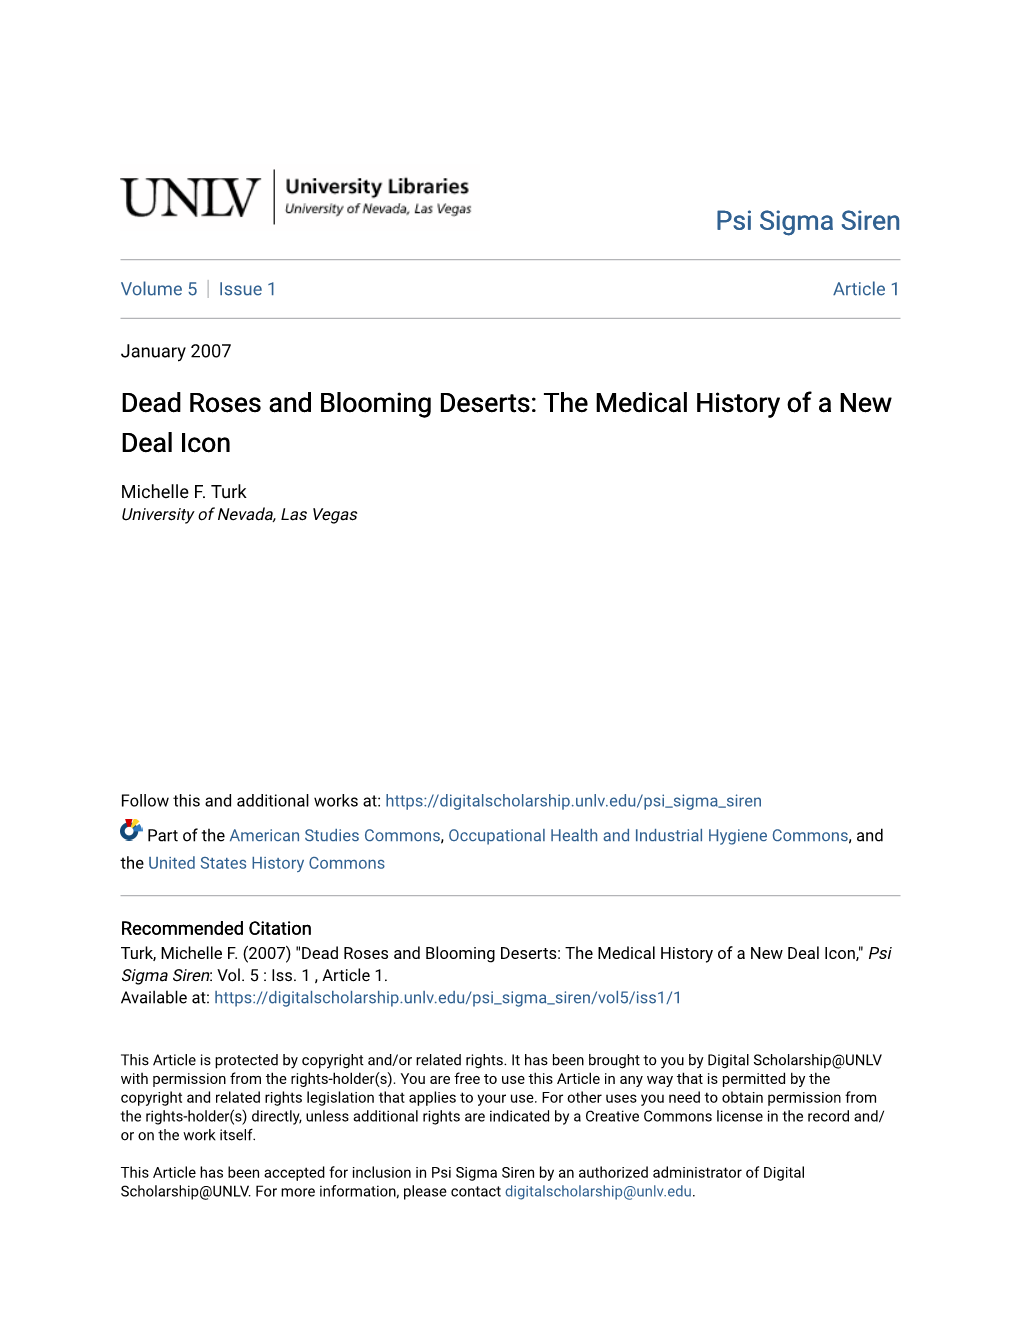 Dead Roses and Blooming Deserts: the Medical History of a New Deal Icon